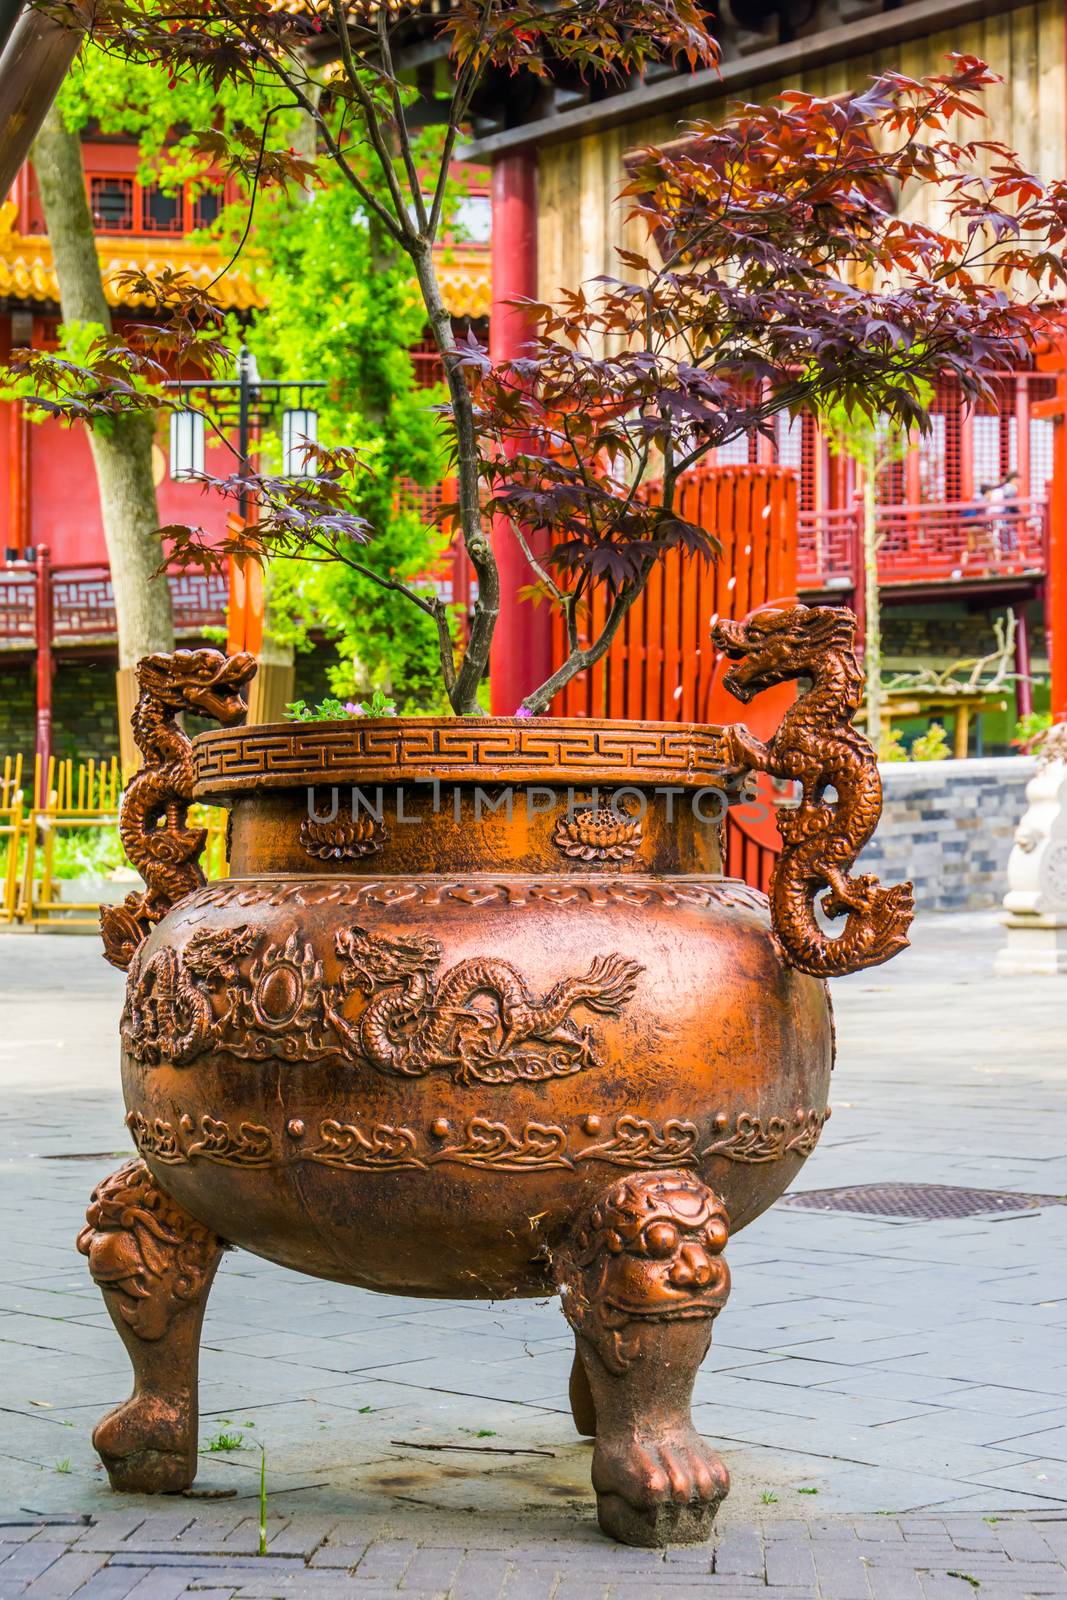 Beautiful japanese cauldron planter decorated with traditional dragons, Asian garden decorations by charlottebleijenberg